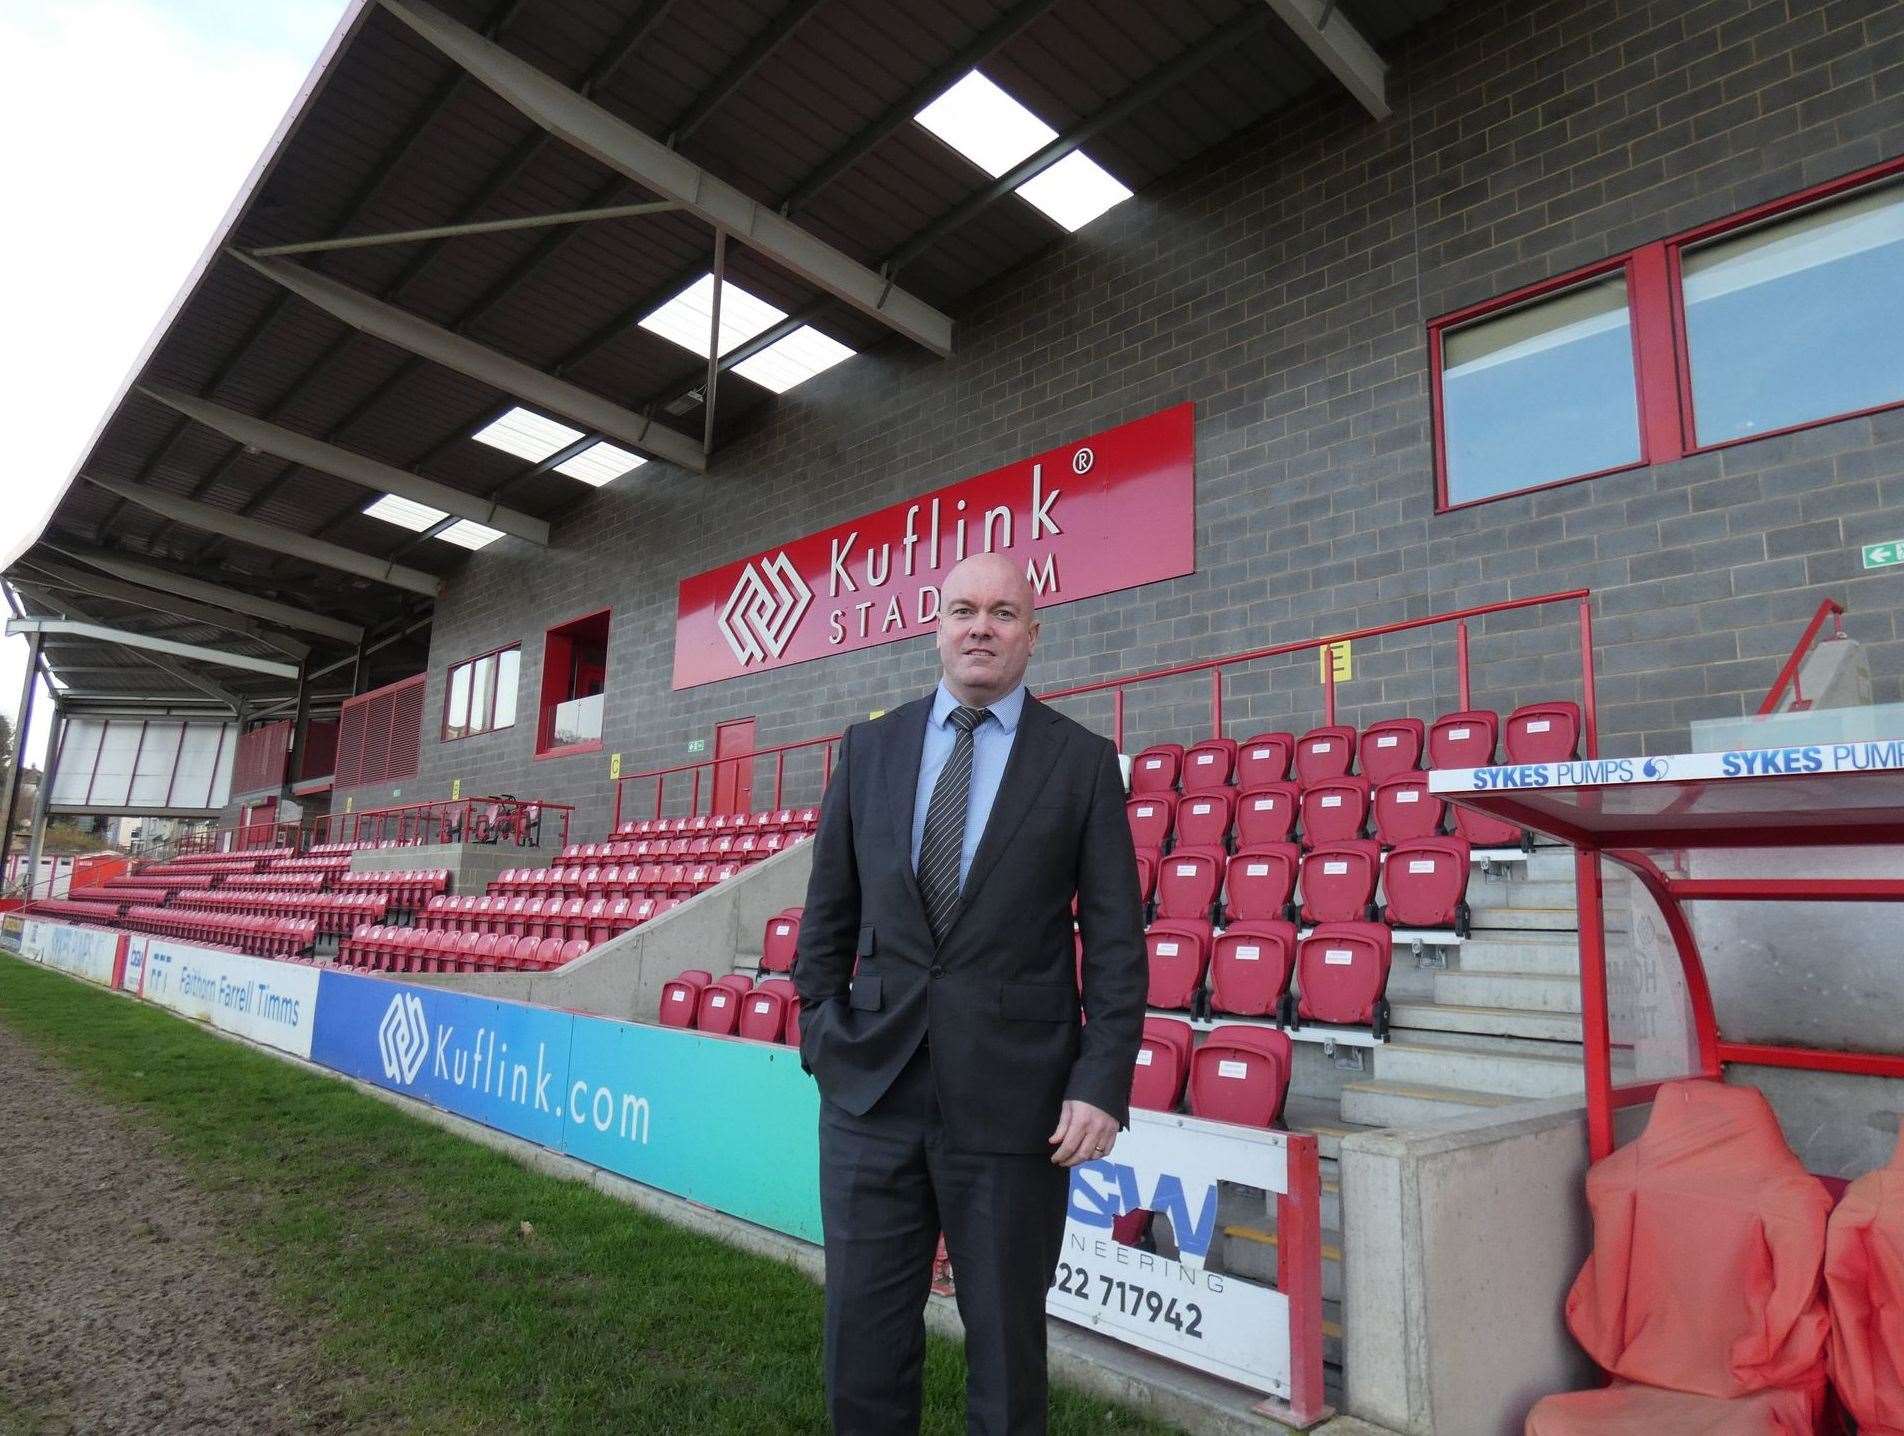 Ebbsfleet United chief exec Damian Irvine believes the proposals can help secure the club and the area's future. Picture: ebbsfleetunited.co.uk